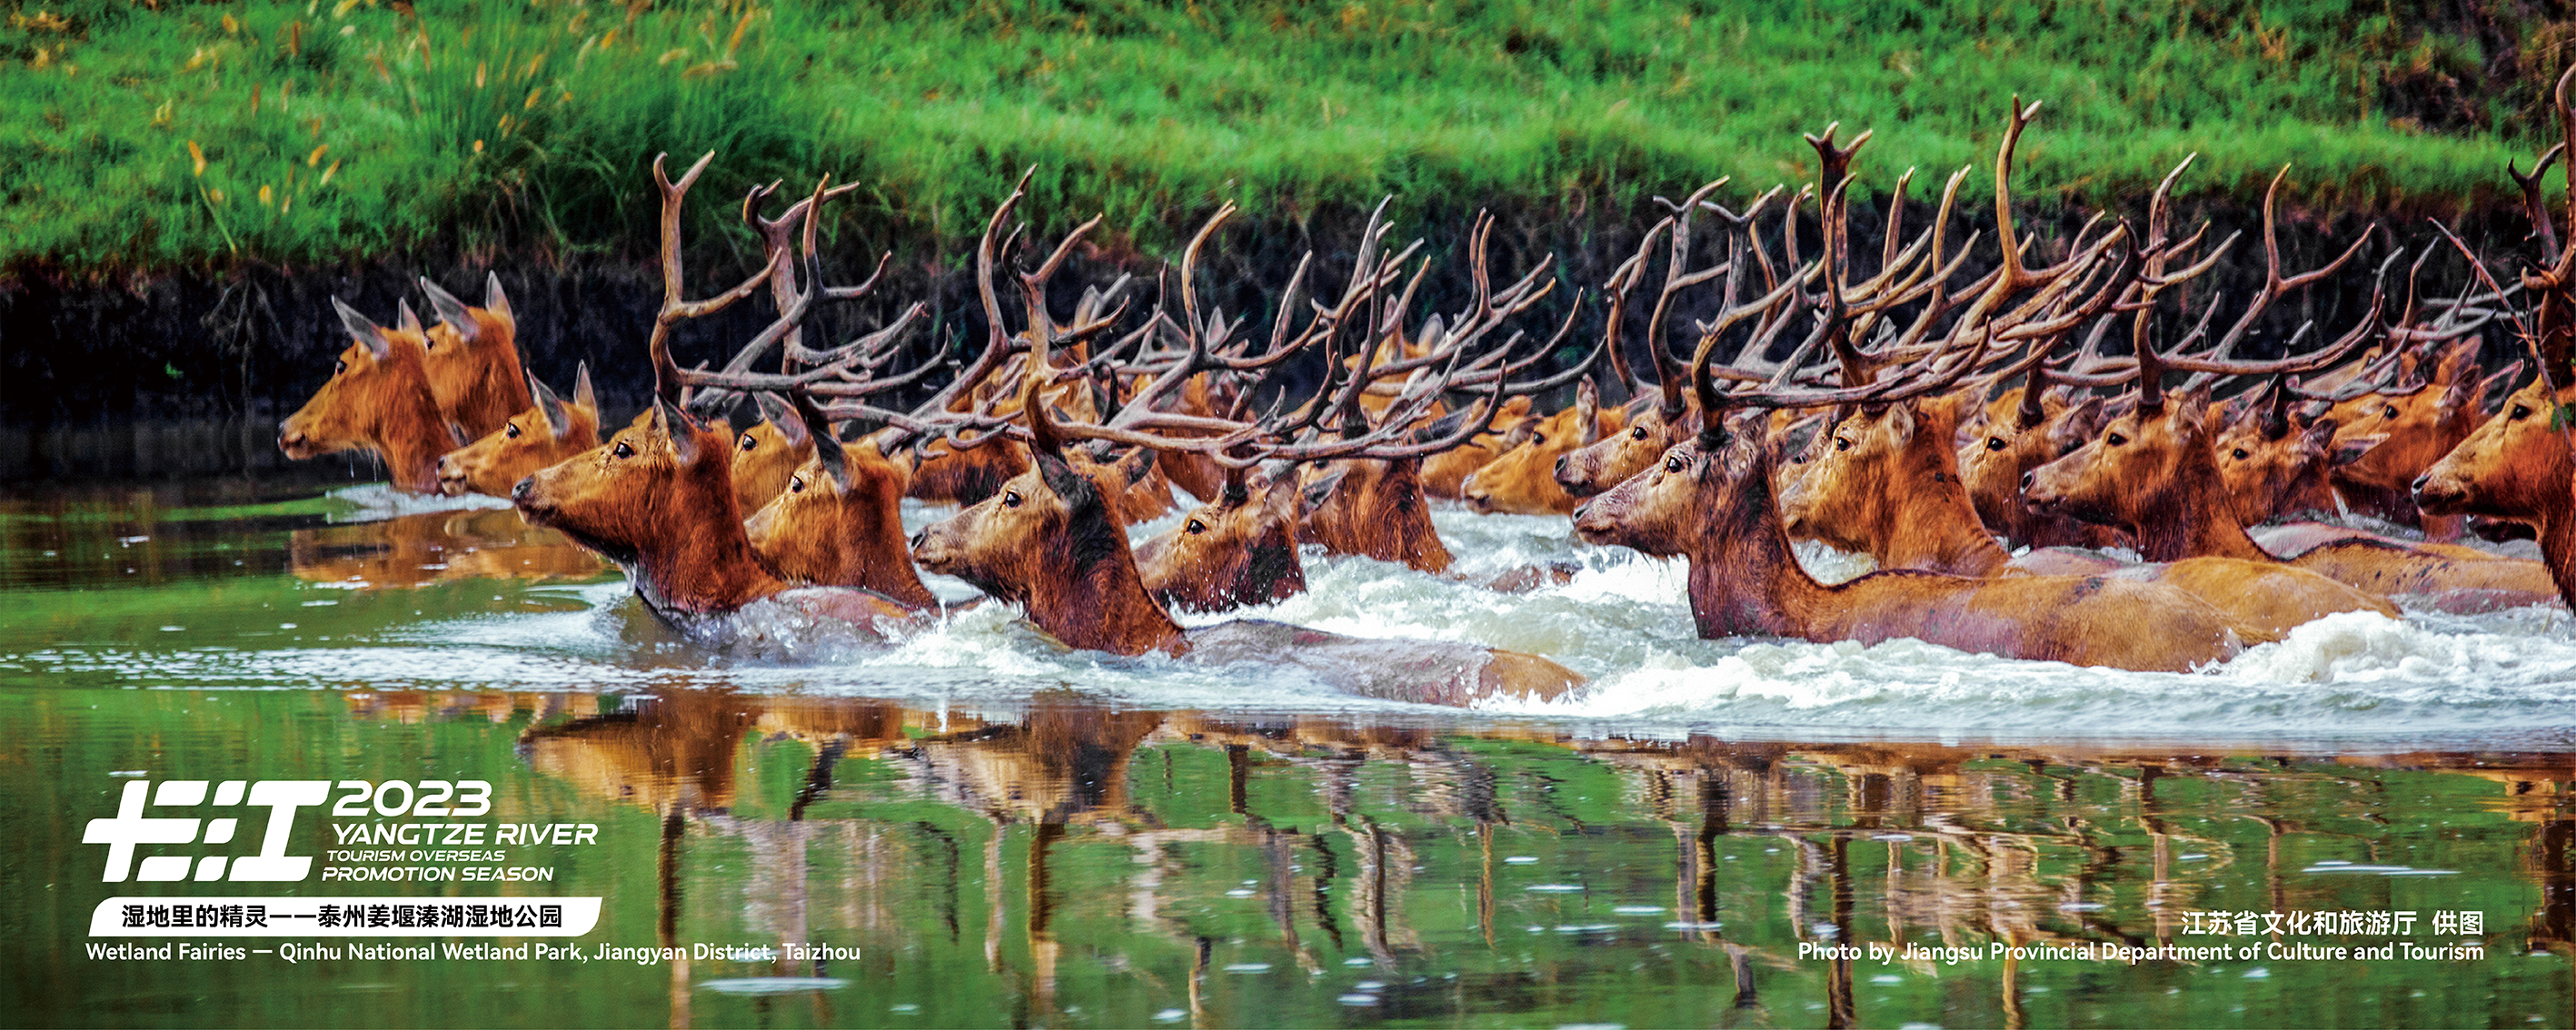 This undated photo shows a herd of wild elks wading through water at the Qinhu National Wetland Park in Taizhou, east China's Jiangsu Province. The park is a major scenic spot on the Yangtze River Basin. /Photo provided to CGTN 